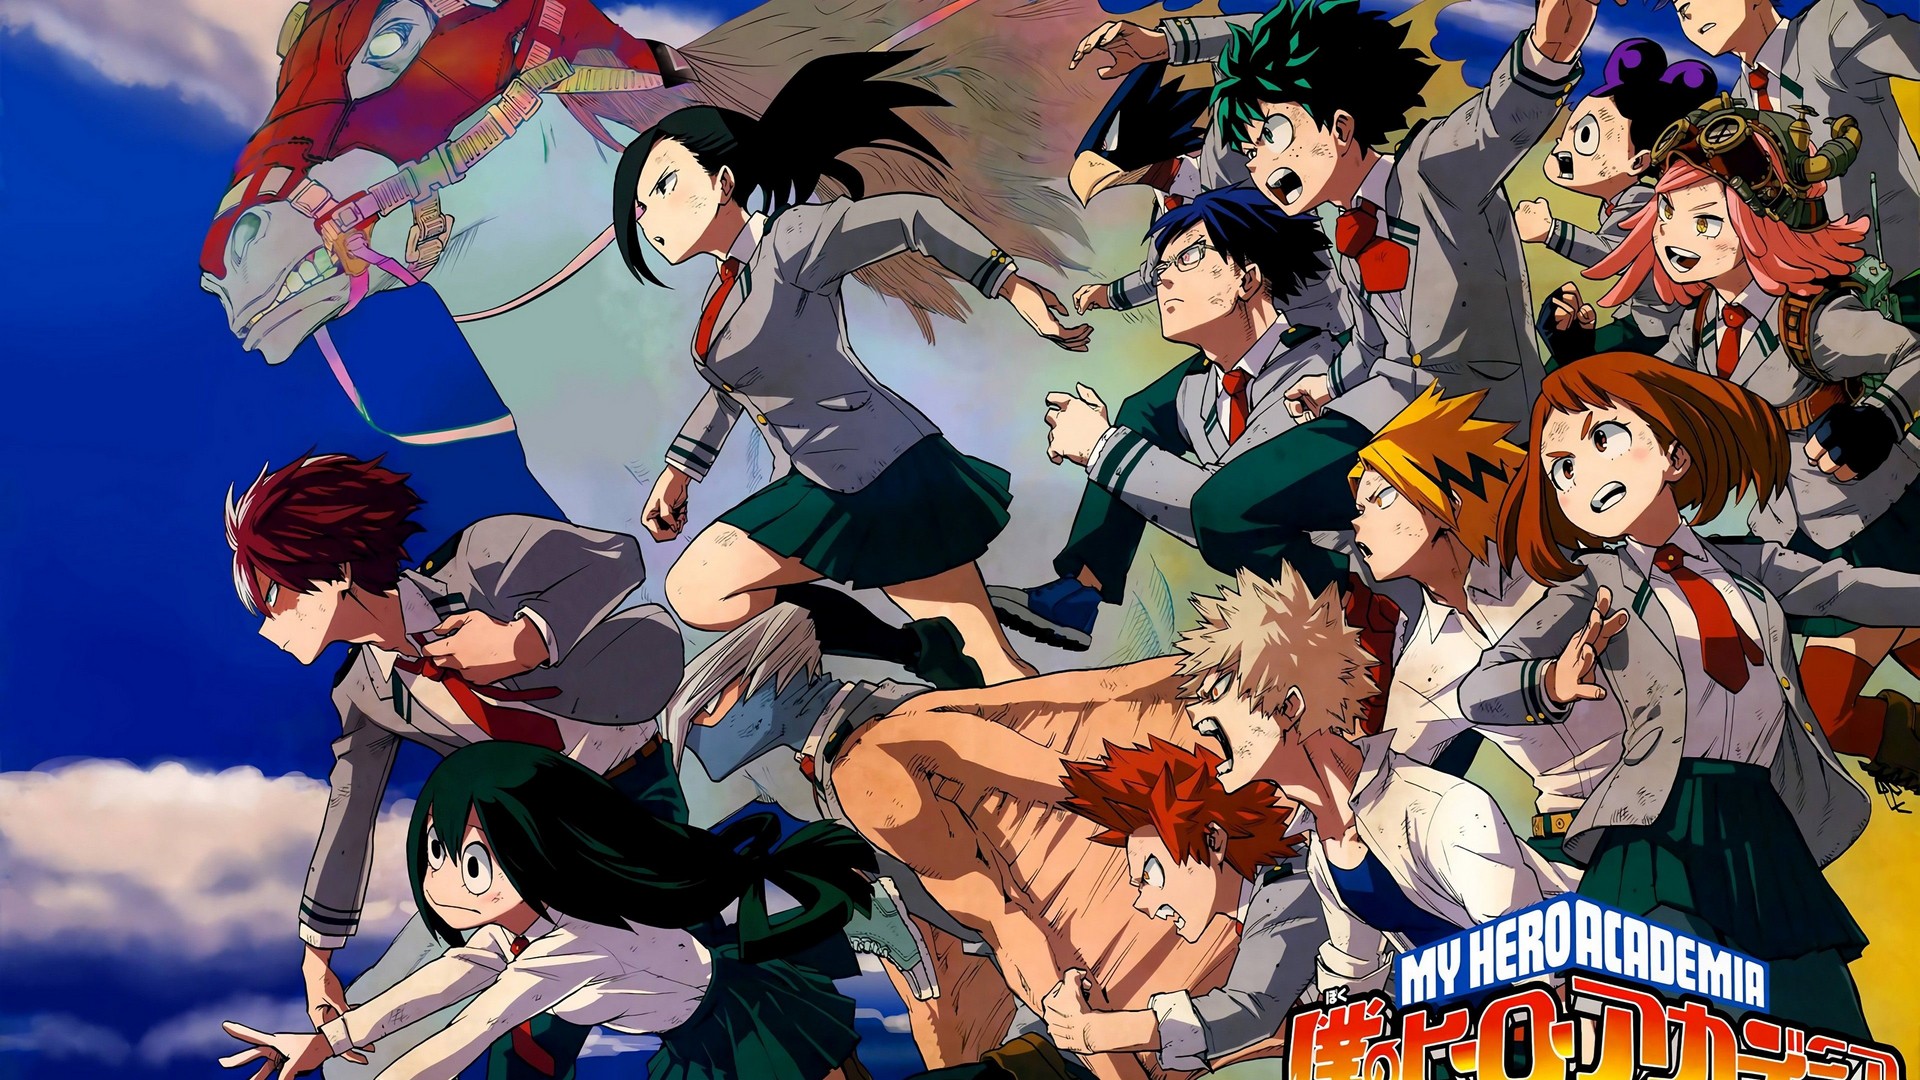 My Hero Academia Trailer Wallpaper with high-resolution 1920x1080 pixel. You can use this poster wallpaper for your Desktop Computers, Mac Screensavers, Windows Backgrounds, iPhone Wallpapers, Tablet or Android Lock screen and another Mobile device